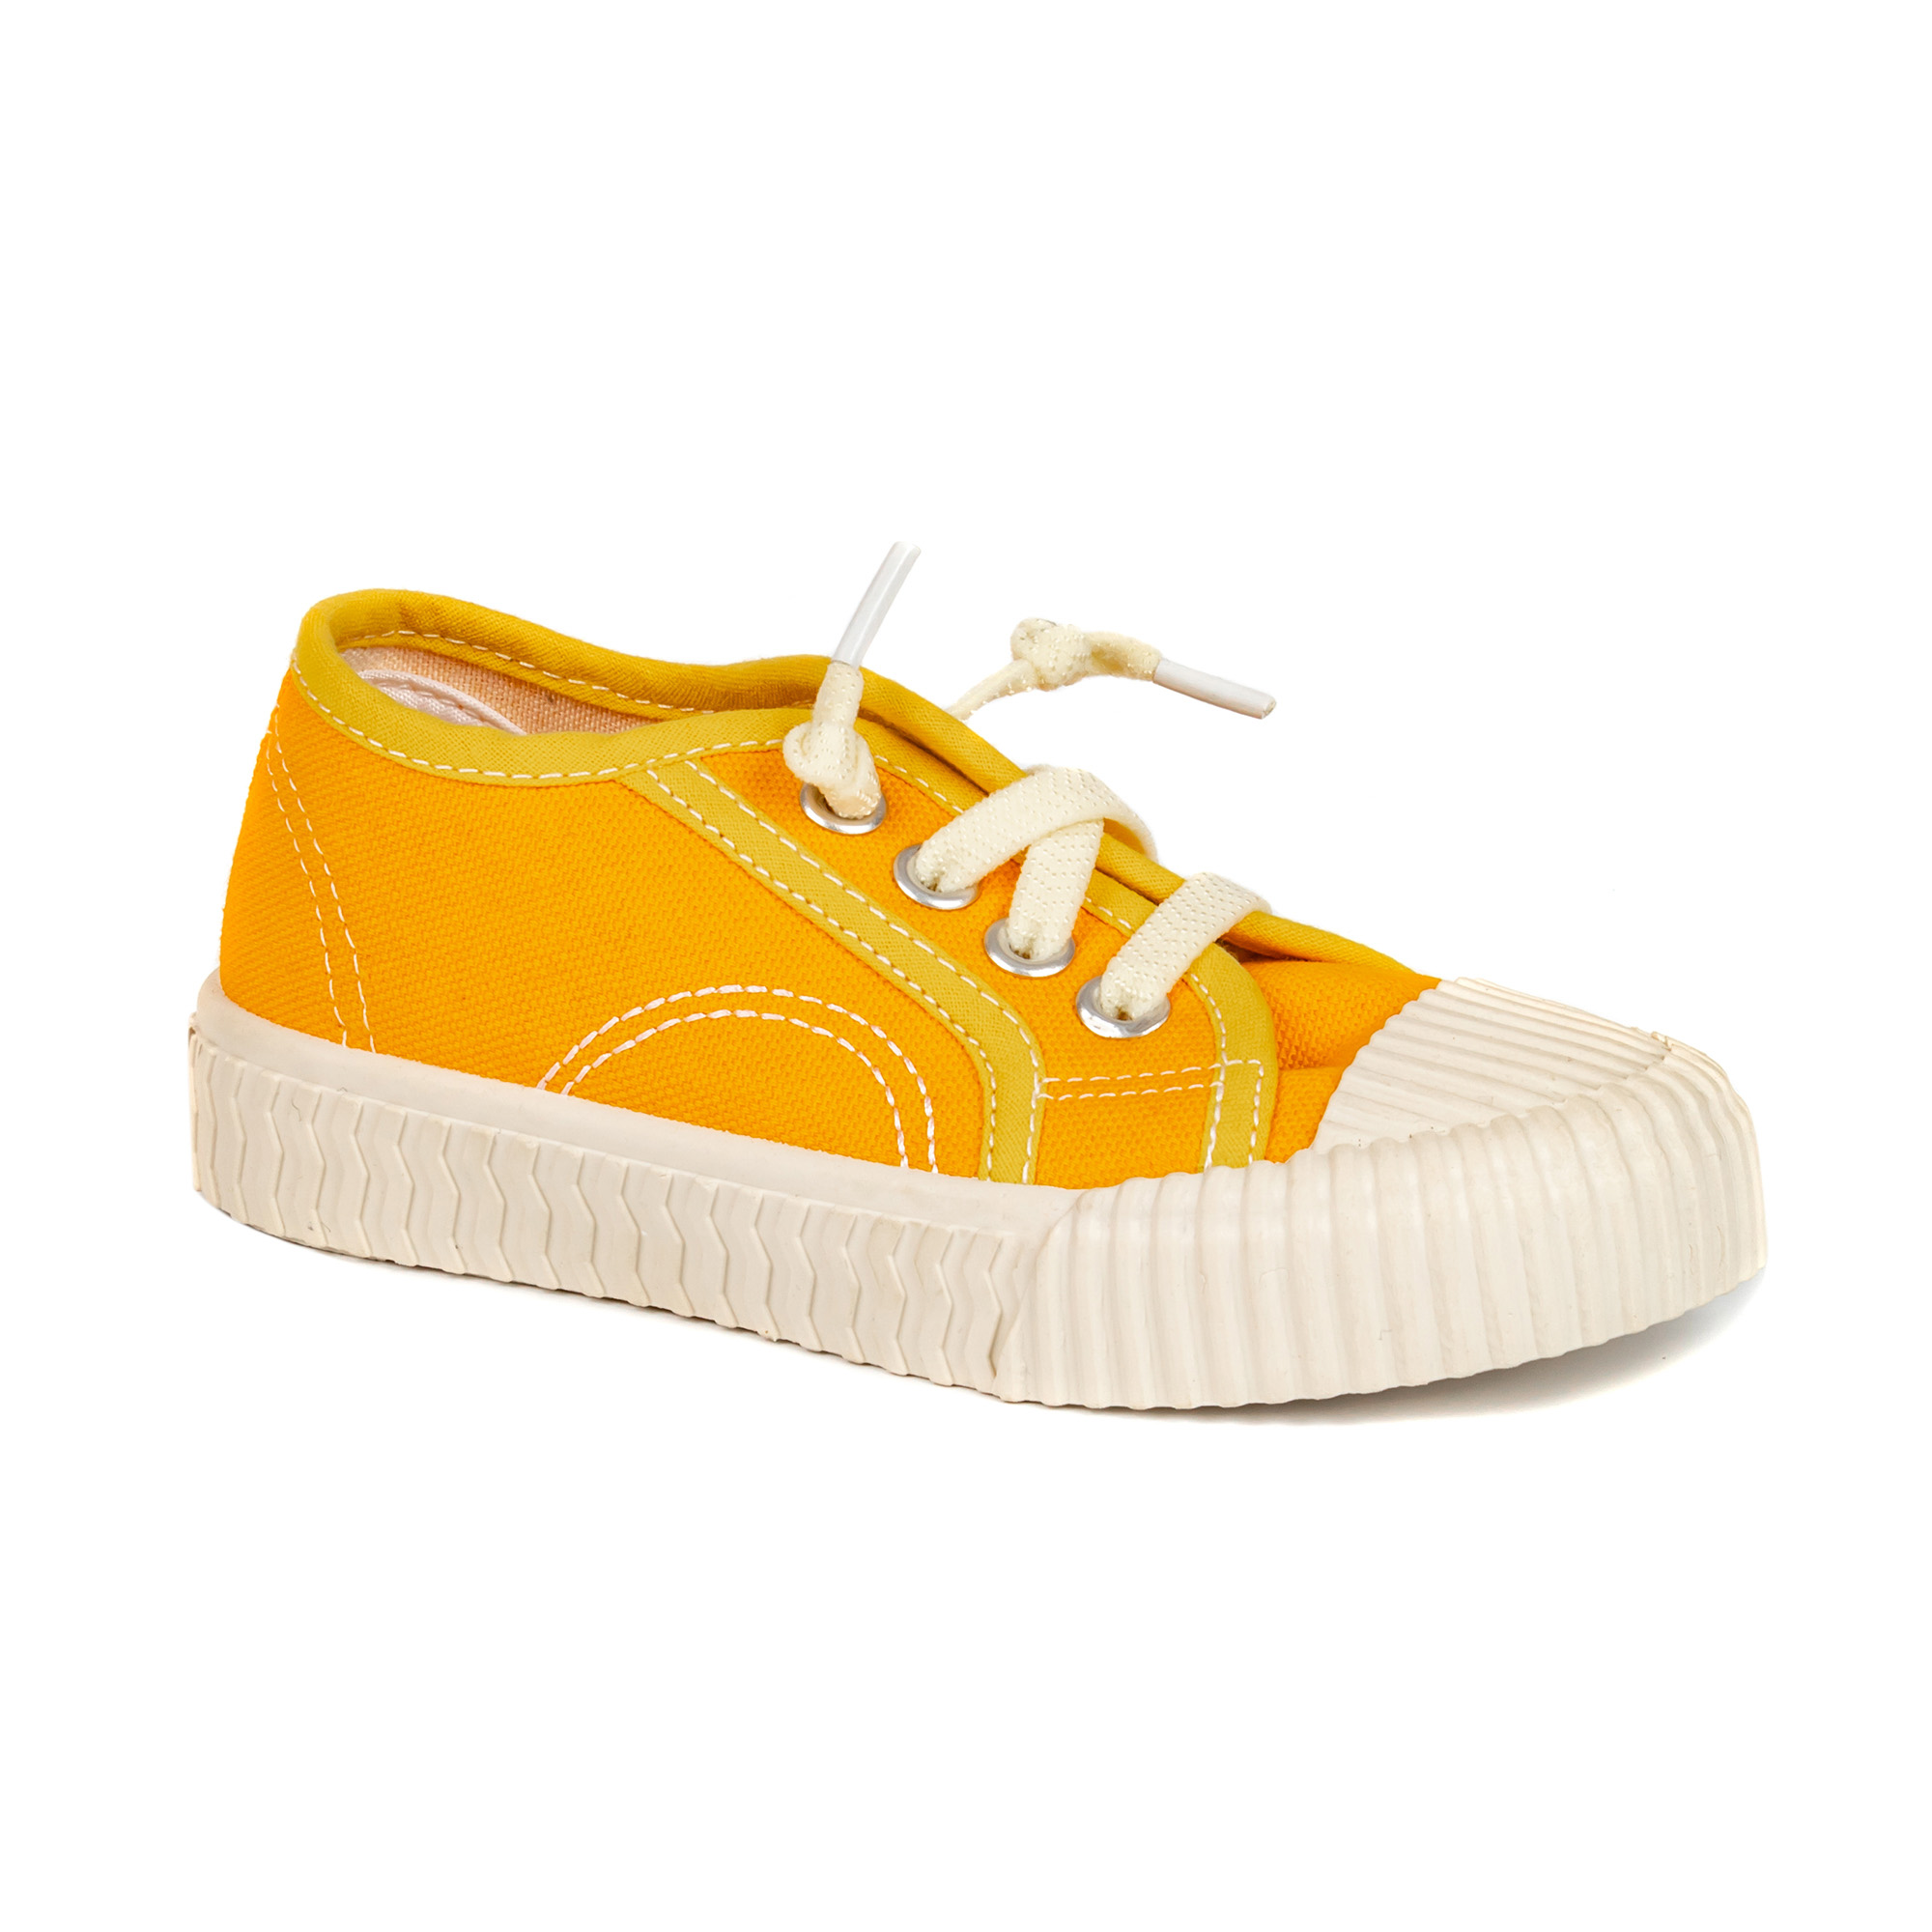 Sneaker Shoes, Children Shoes,Injection shoes ,Yellow, Textile  Upper+Lace PVC injection Outsole